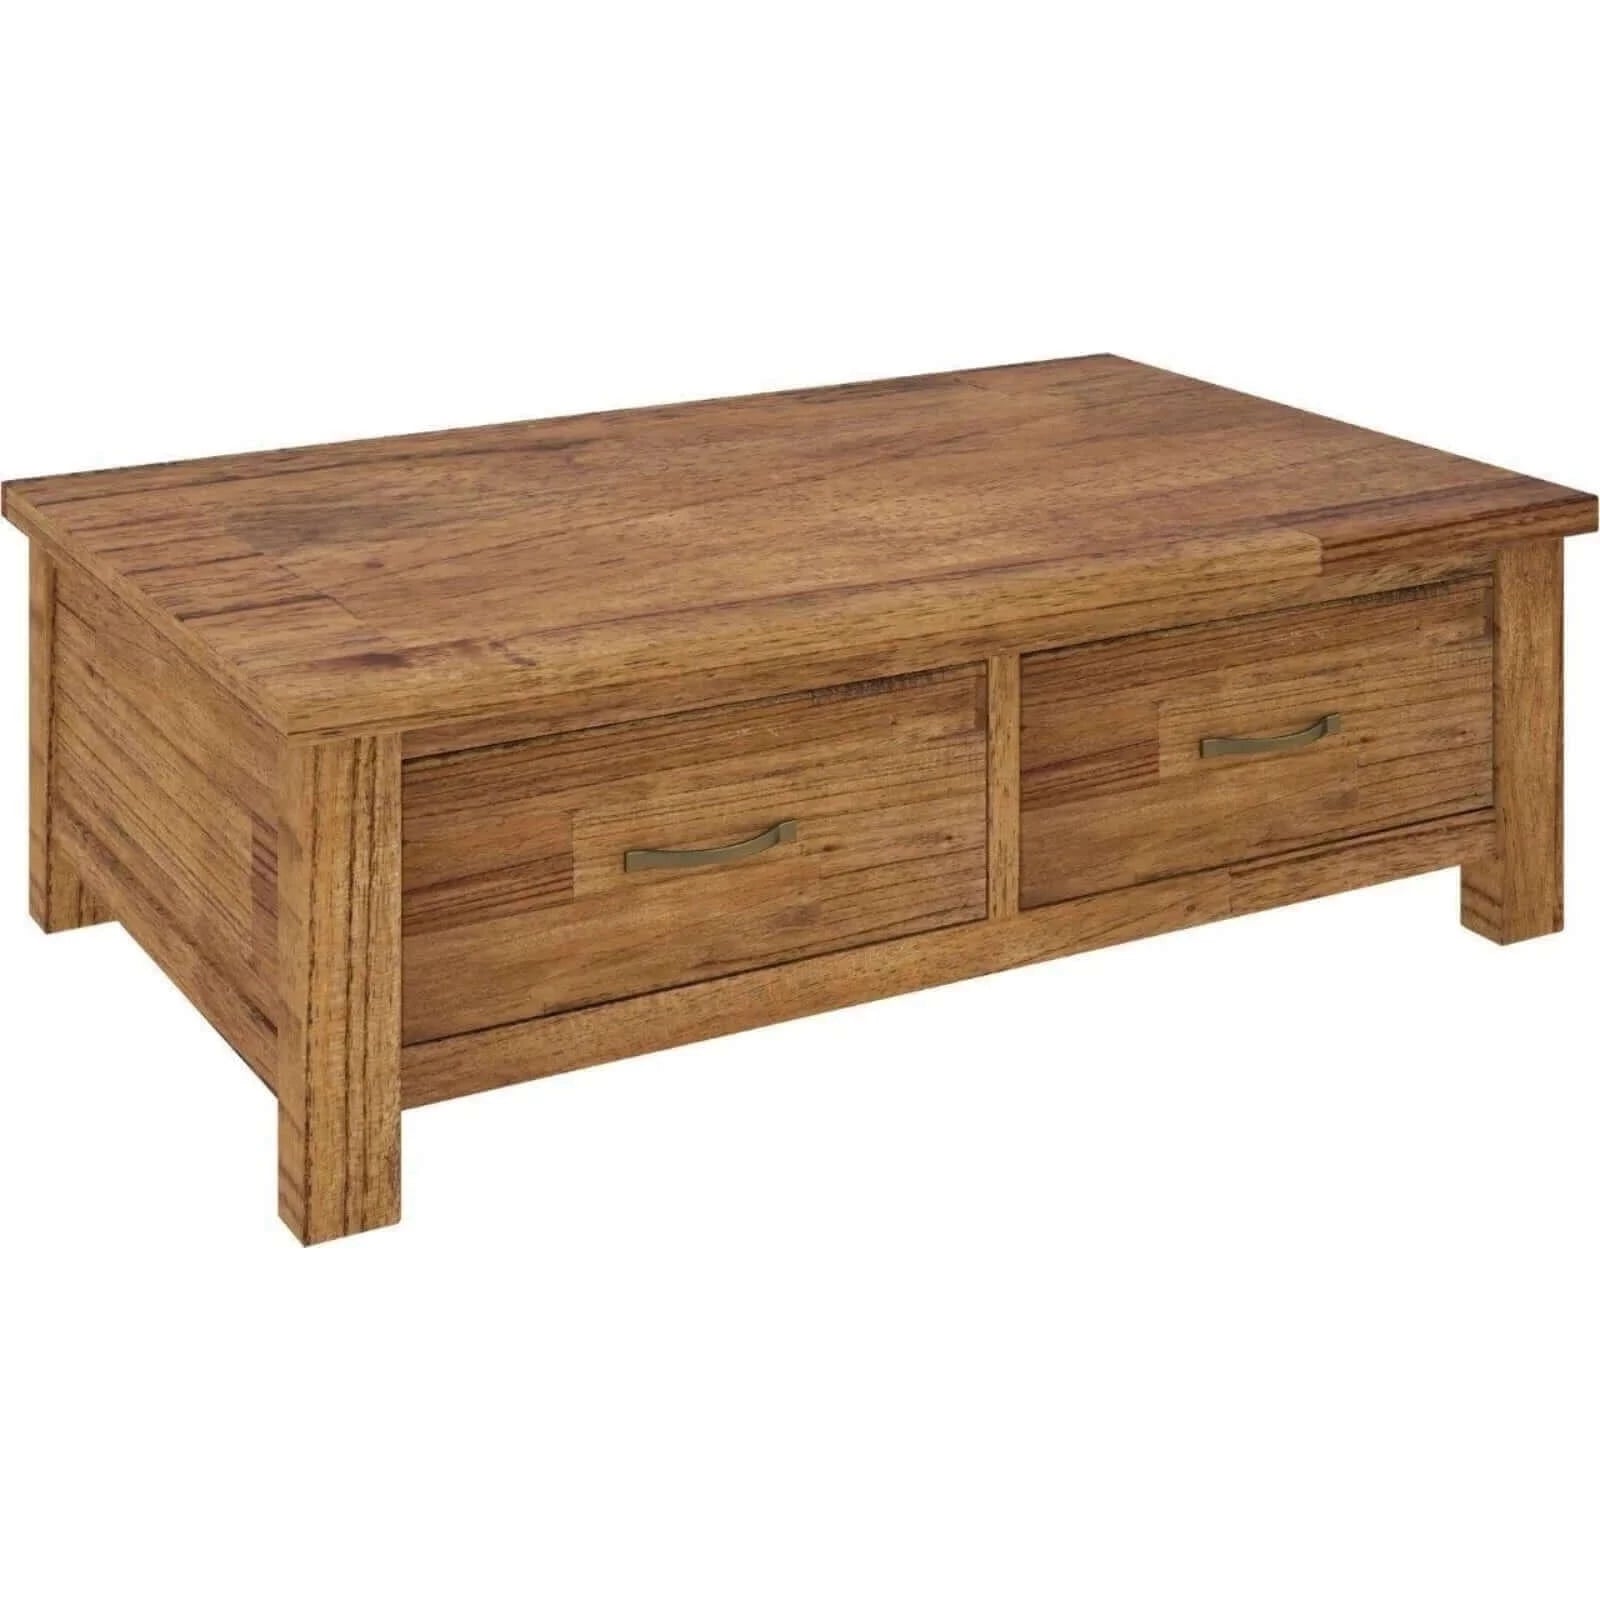 Birdsville Coffee Table 120cm 2 Drawer Solid Mt Ash Timber Wood - Brown-Upinteriors